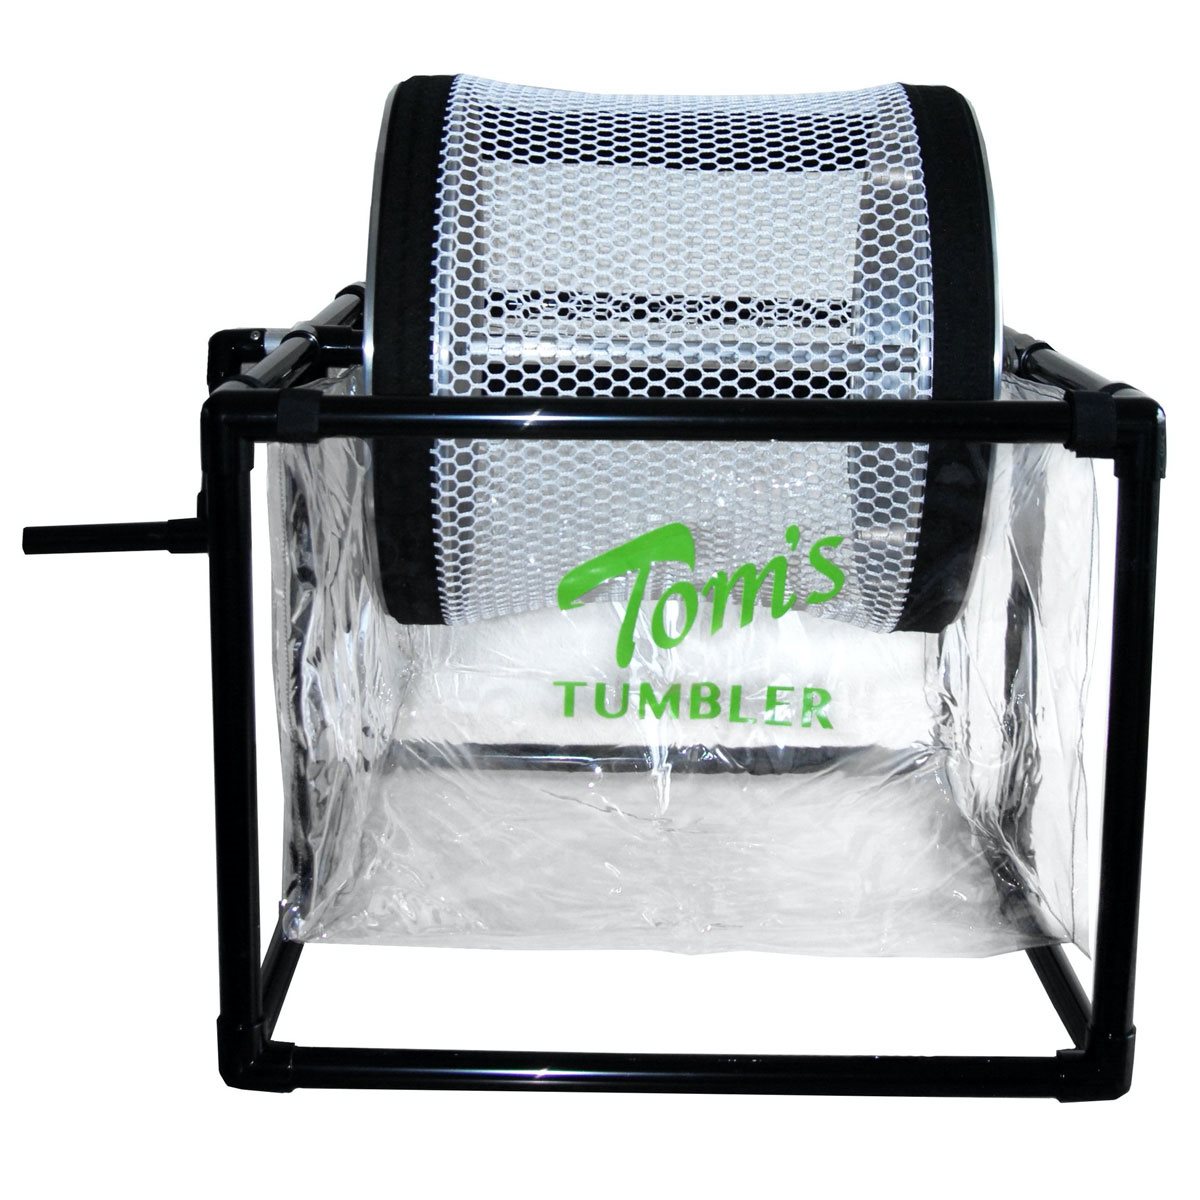 Product Image:Tom's Tumbler TTT 1600 Hand Crank Table Top Dry Trimmer